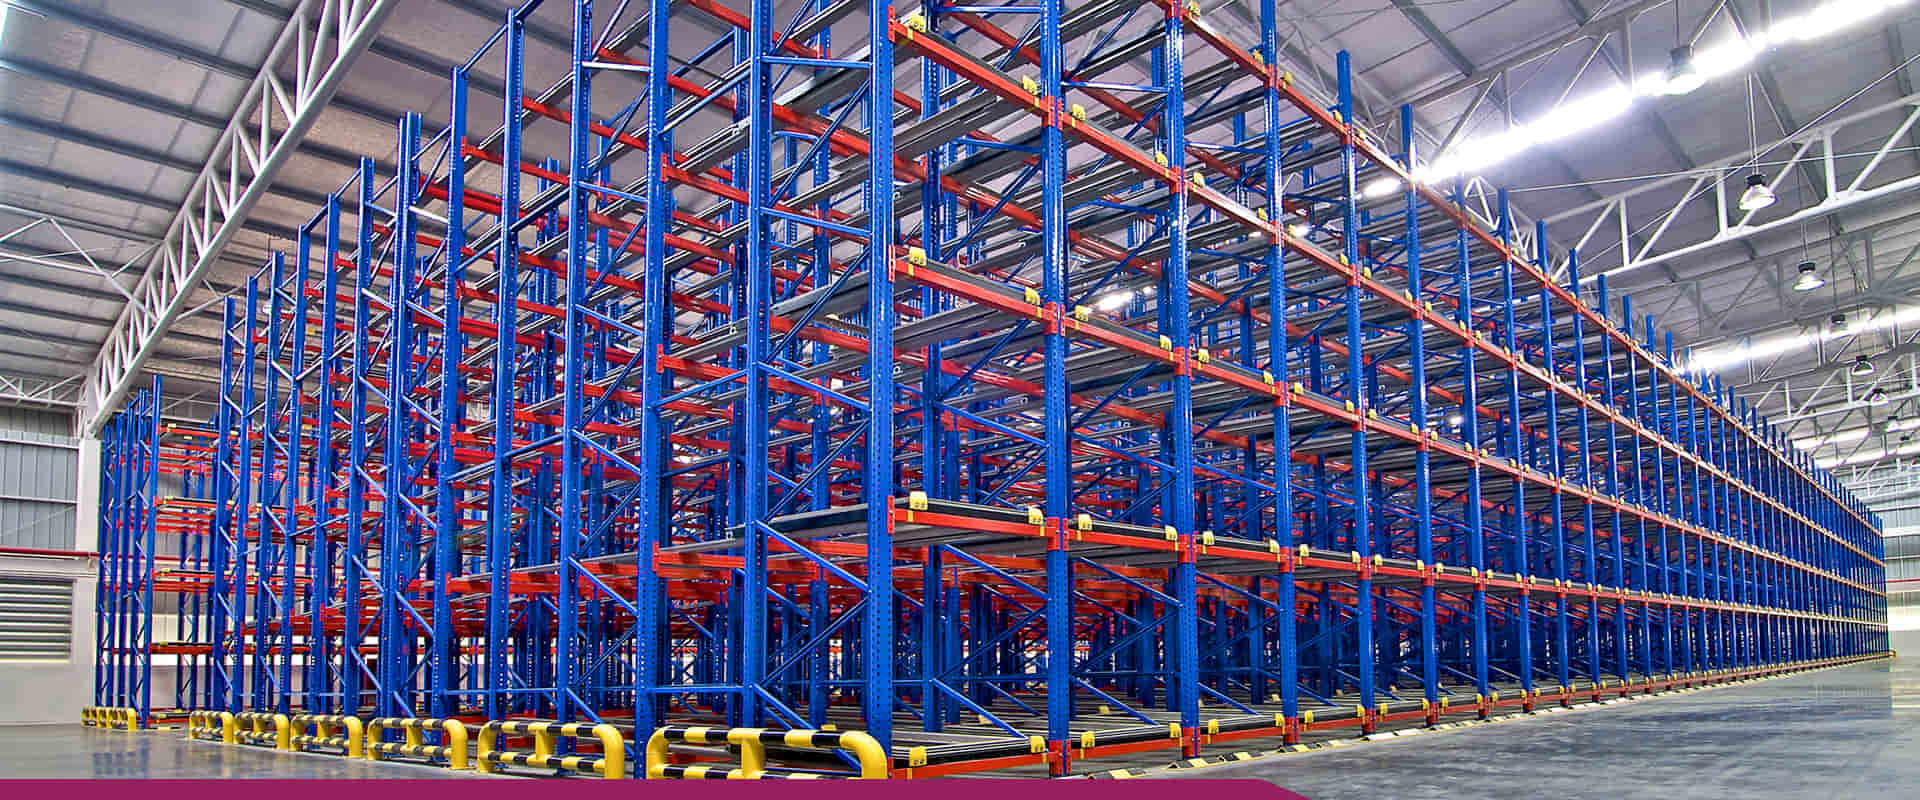 India’s Top Warehouse And Industrial Storage Racks Manufacturer In Panipat